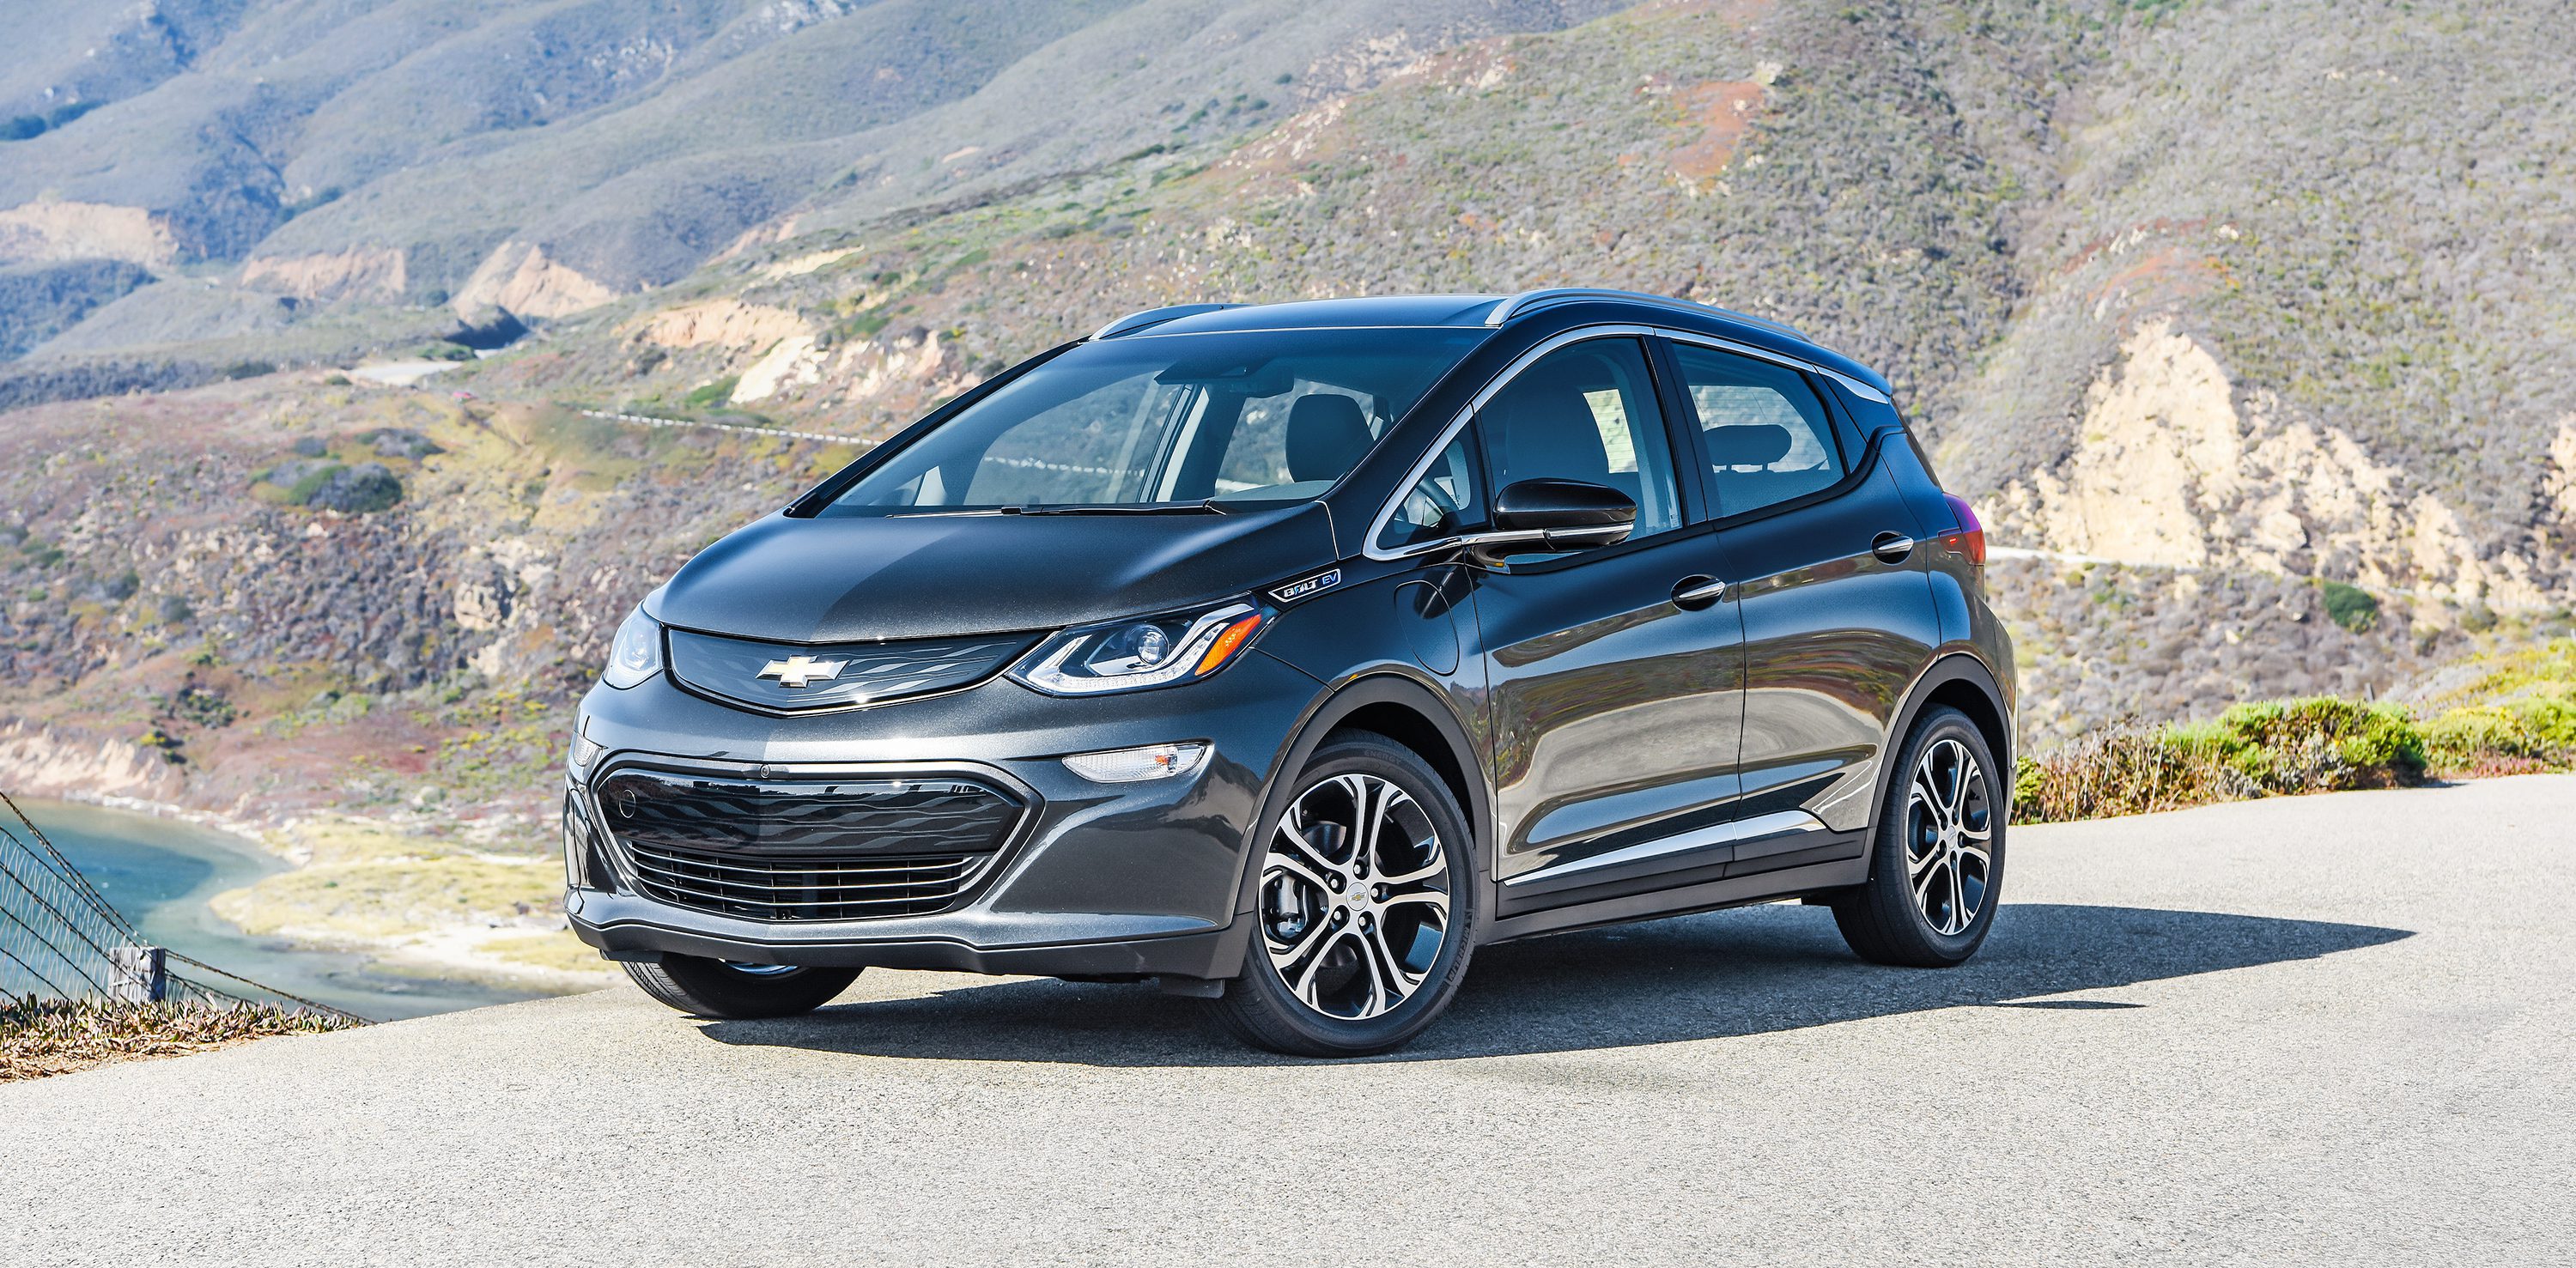 gm-launches-chevy-bolt-ev-s-leasing-program-309-a-month-and-0-down